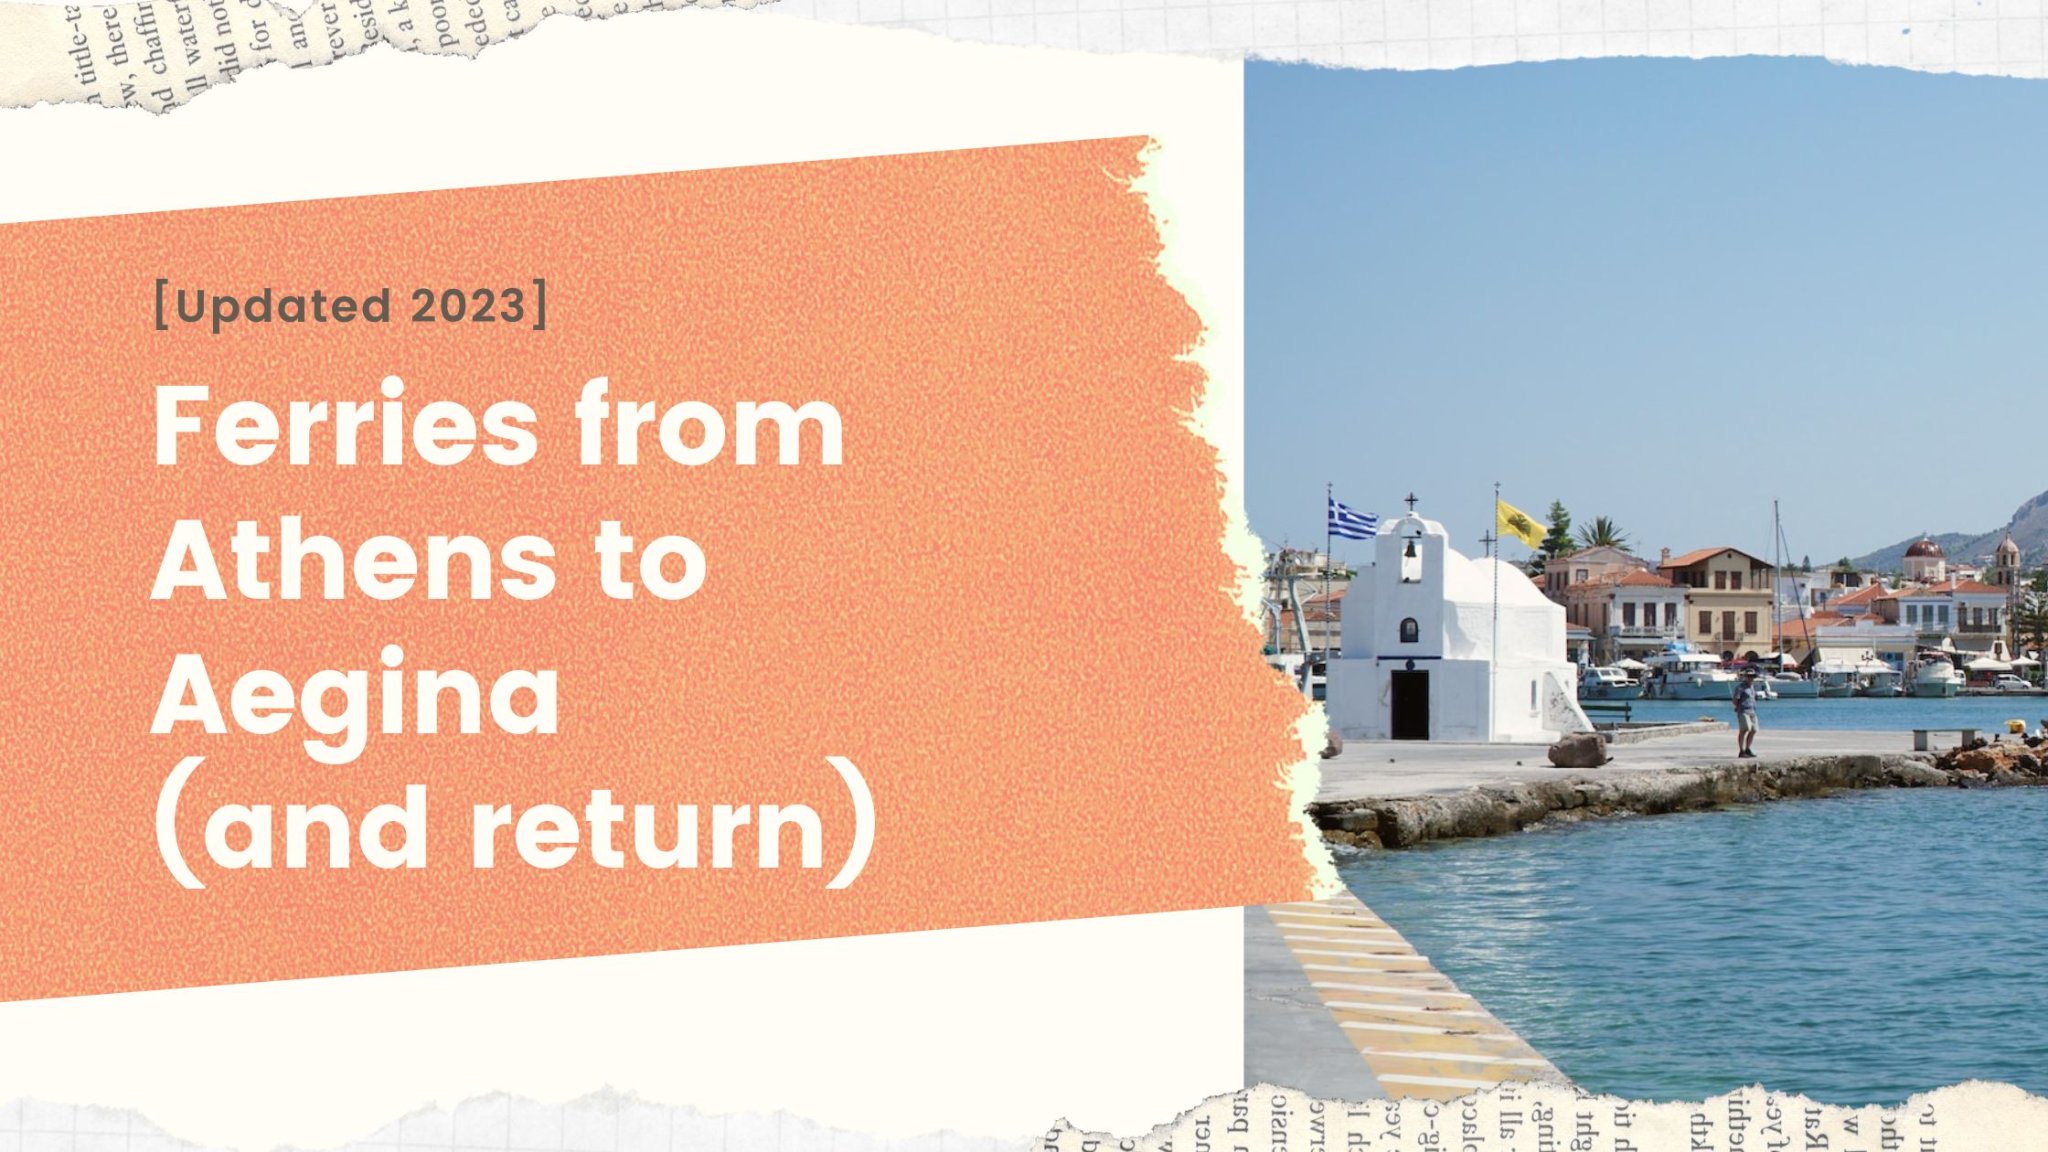 Ferries from Athens to Aegina (and return) [Updated 2023] | LooknWalk Greece